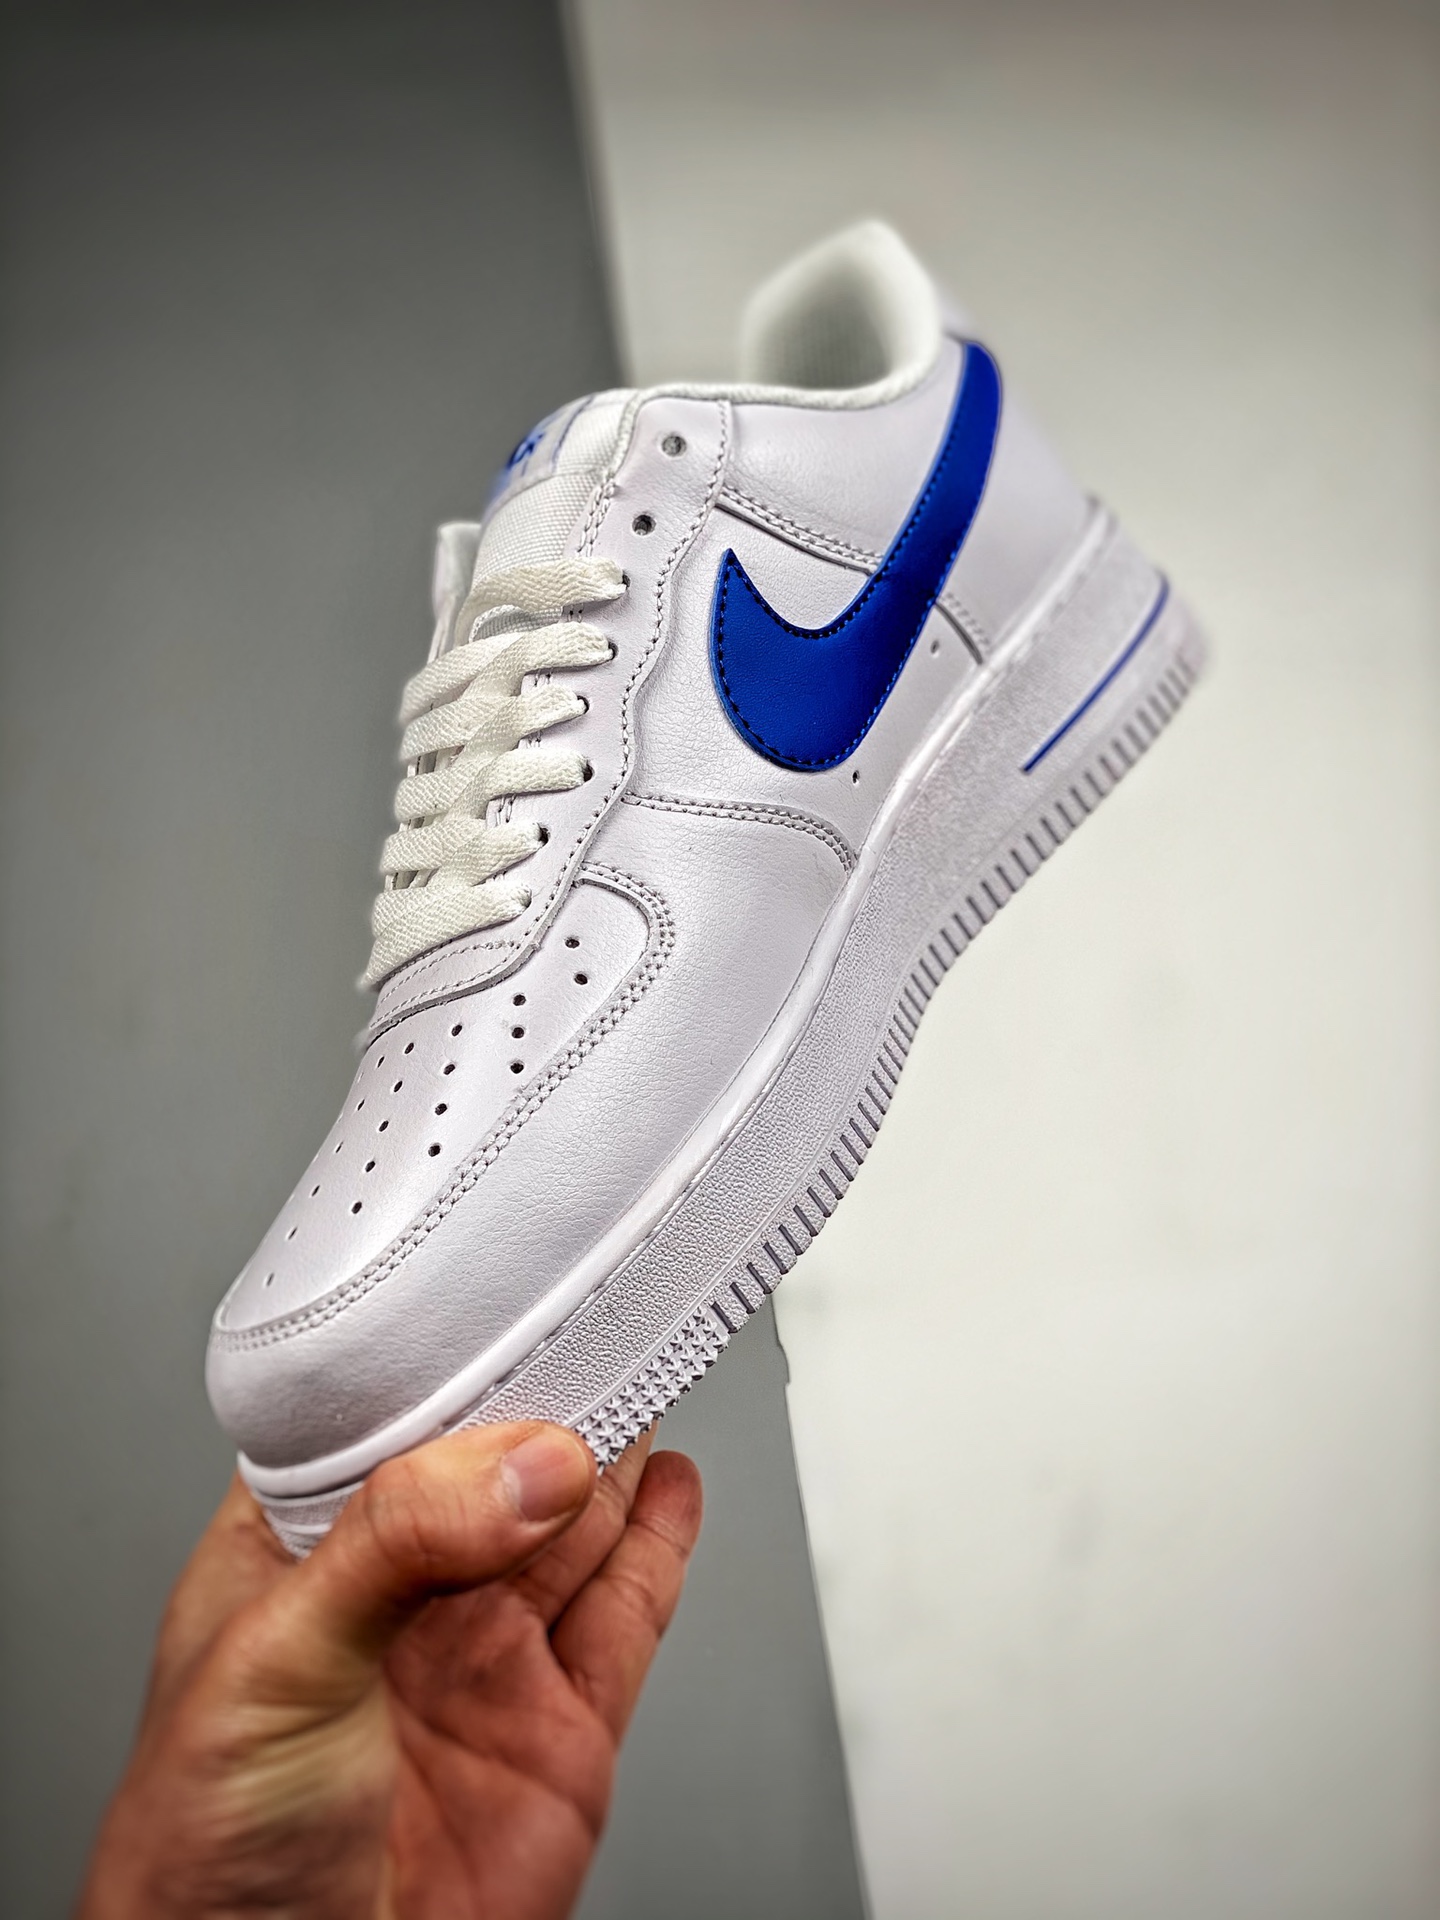 Nike Air Force 1 '07 White/Game Royal For Sale – Sneaker Hello